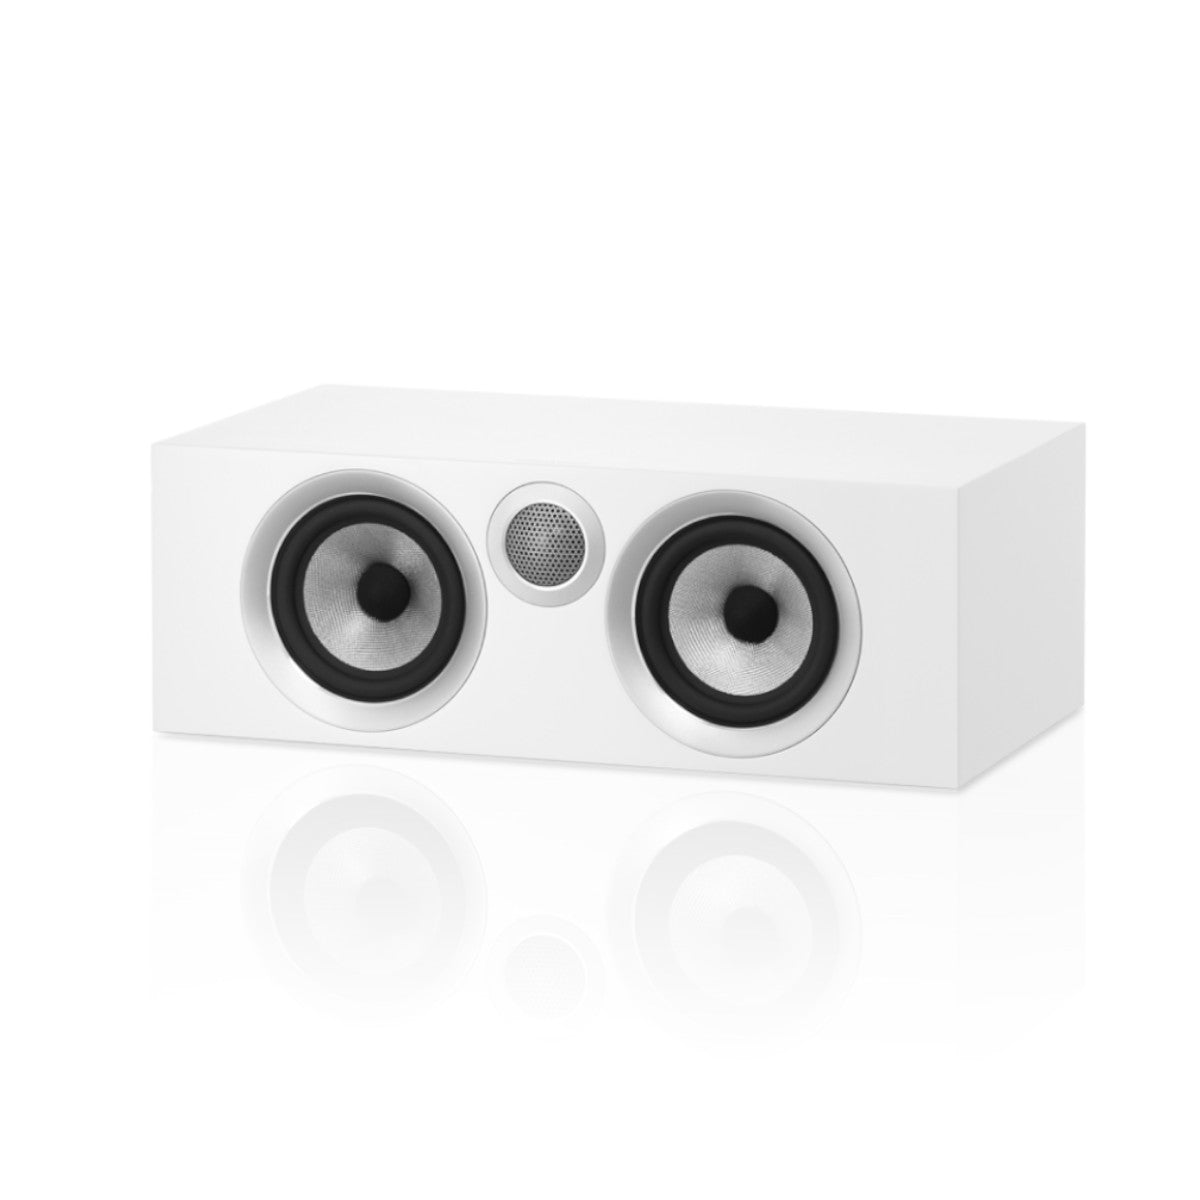 Bowers & Wilkins (B&W) HTM72 S2 2-Way Centre Channel Speaker (white) - Ooberpad